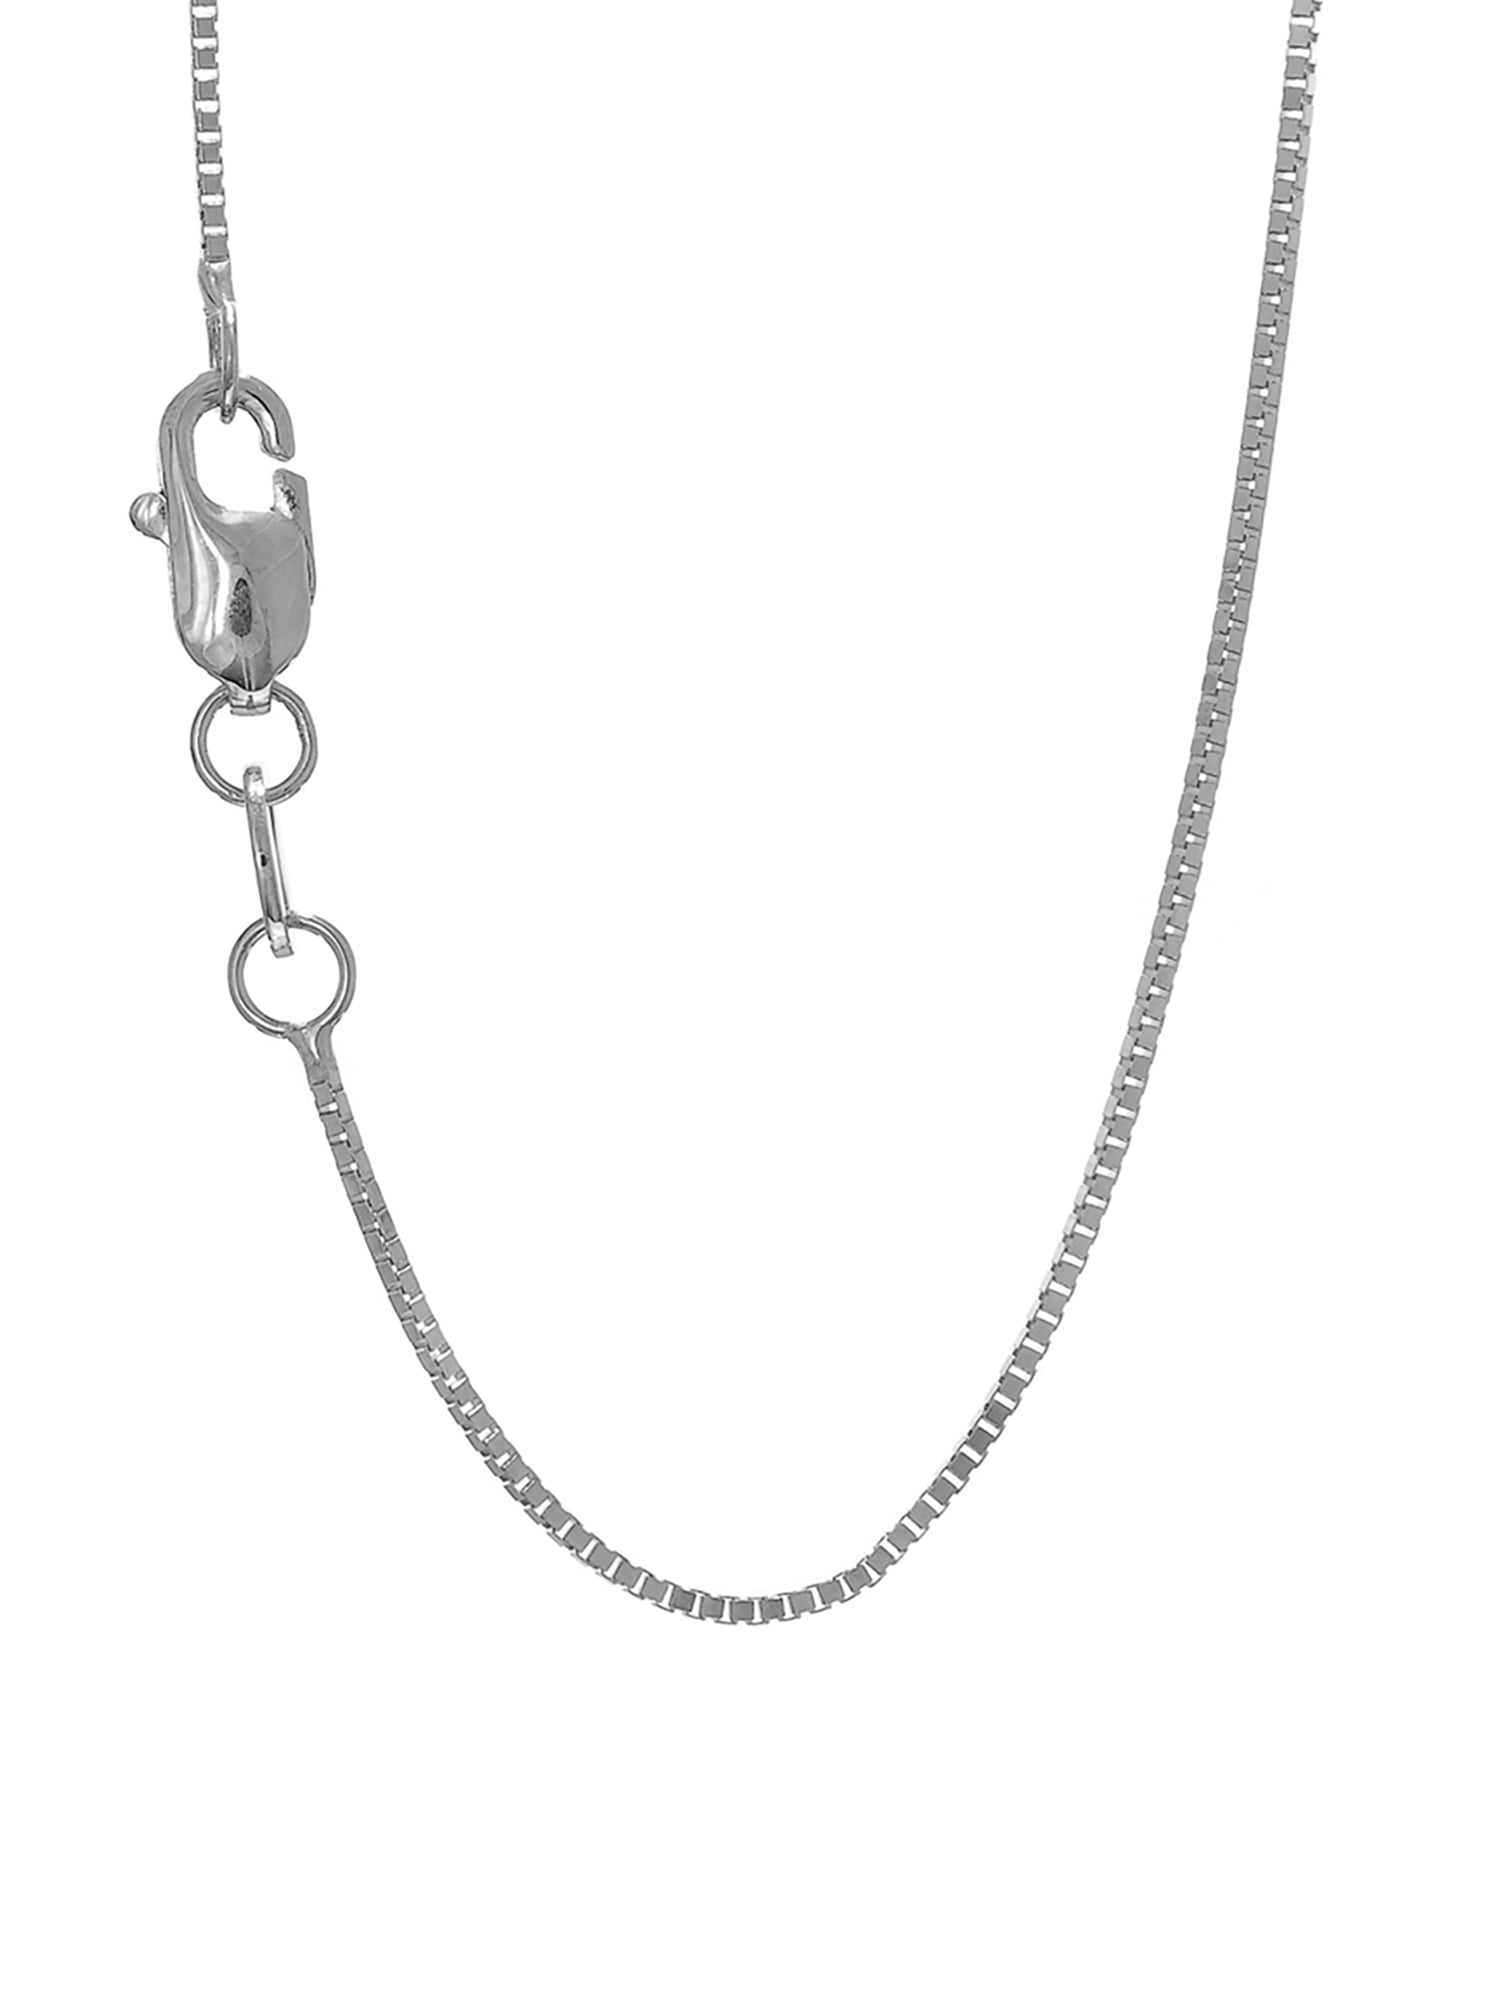 14K Solid White Gold Box  Link Chain Necklace 0.45mm 16",18",20"